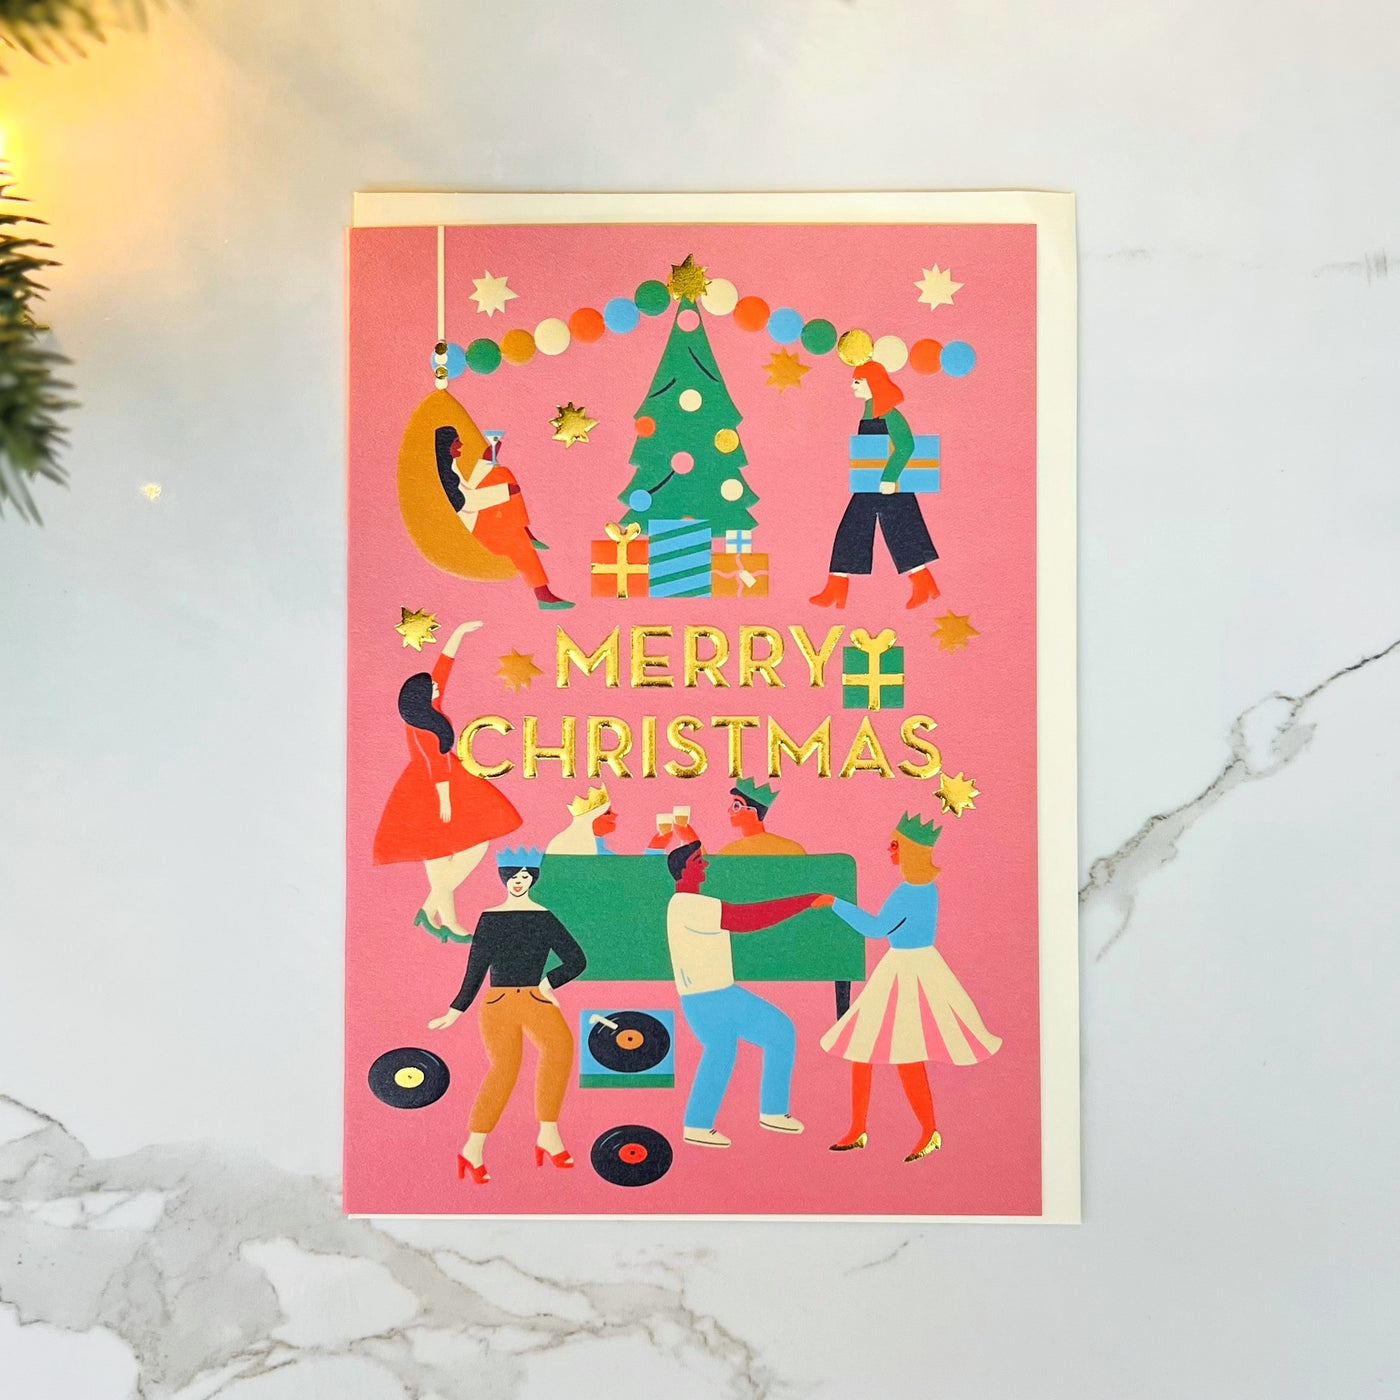 Christmas Card - Merry Christmas with Friends